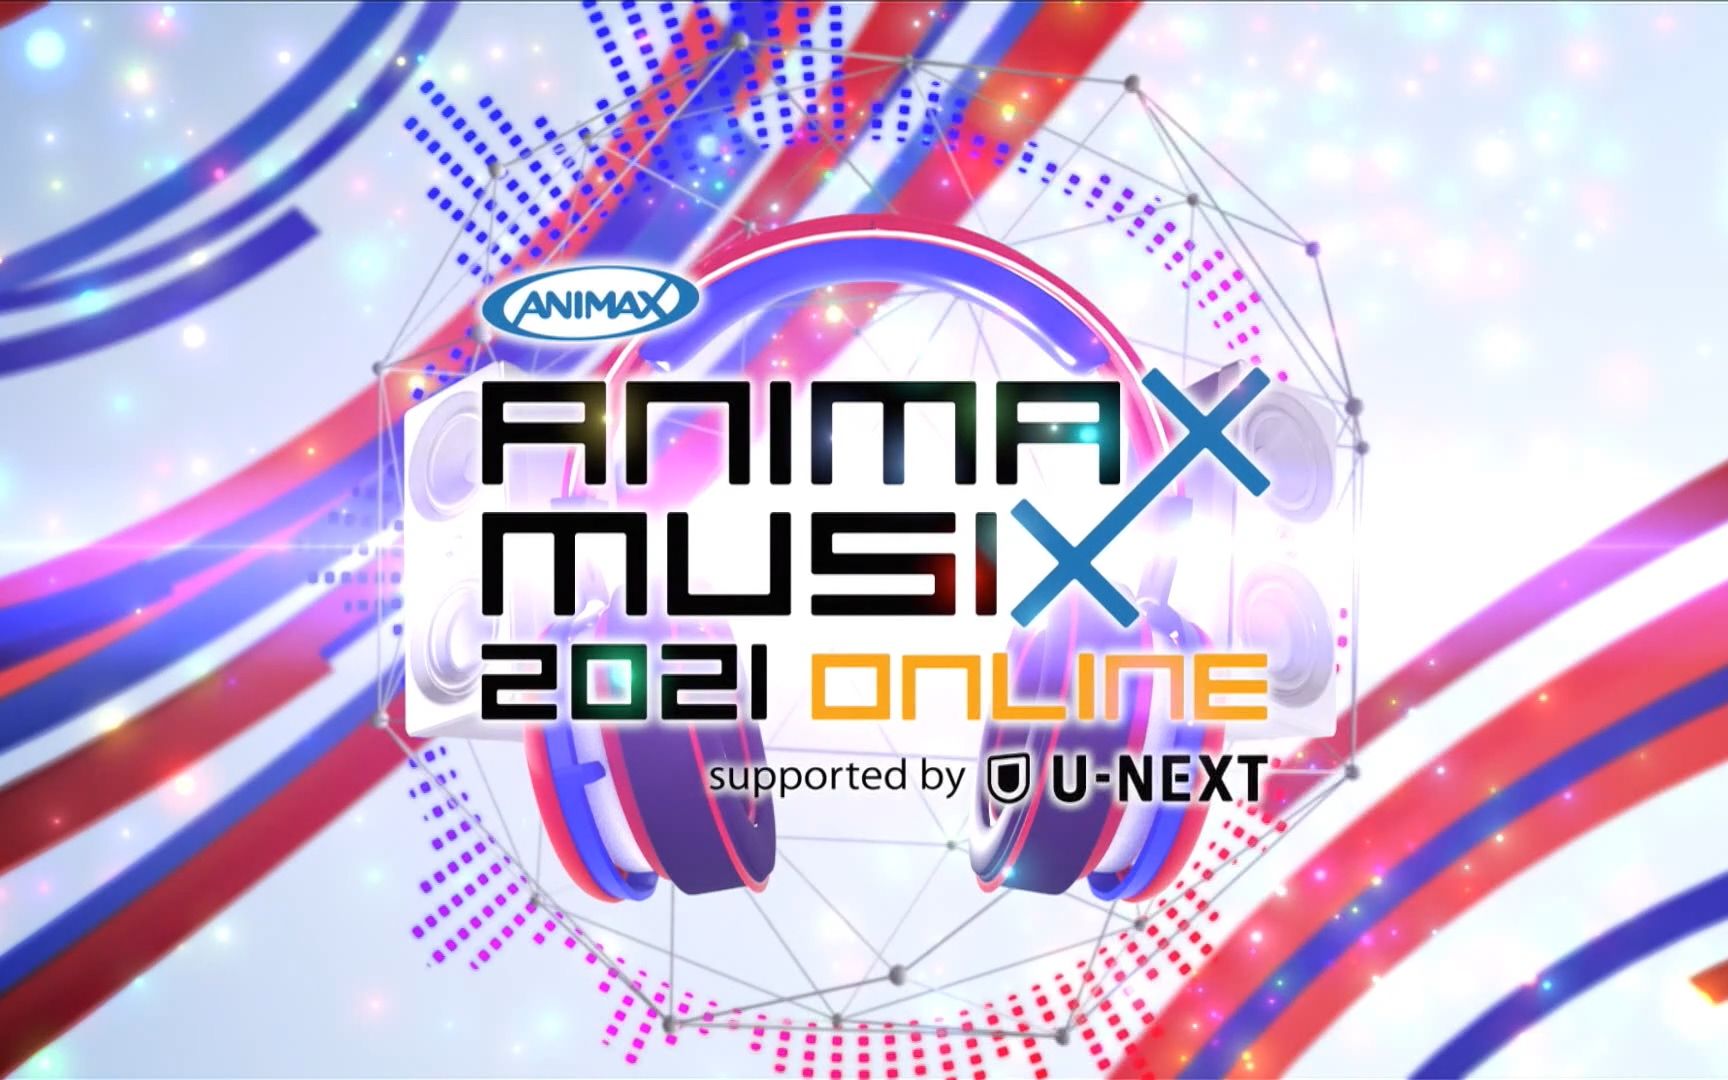 Live Animax Musix 21 Online Supported By U Next Day1 Web Dl 1080p 游戏社